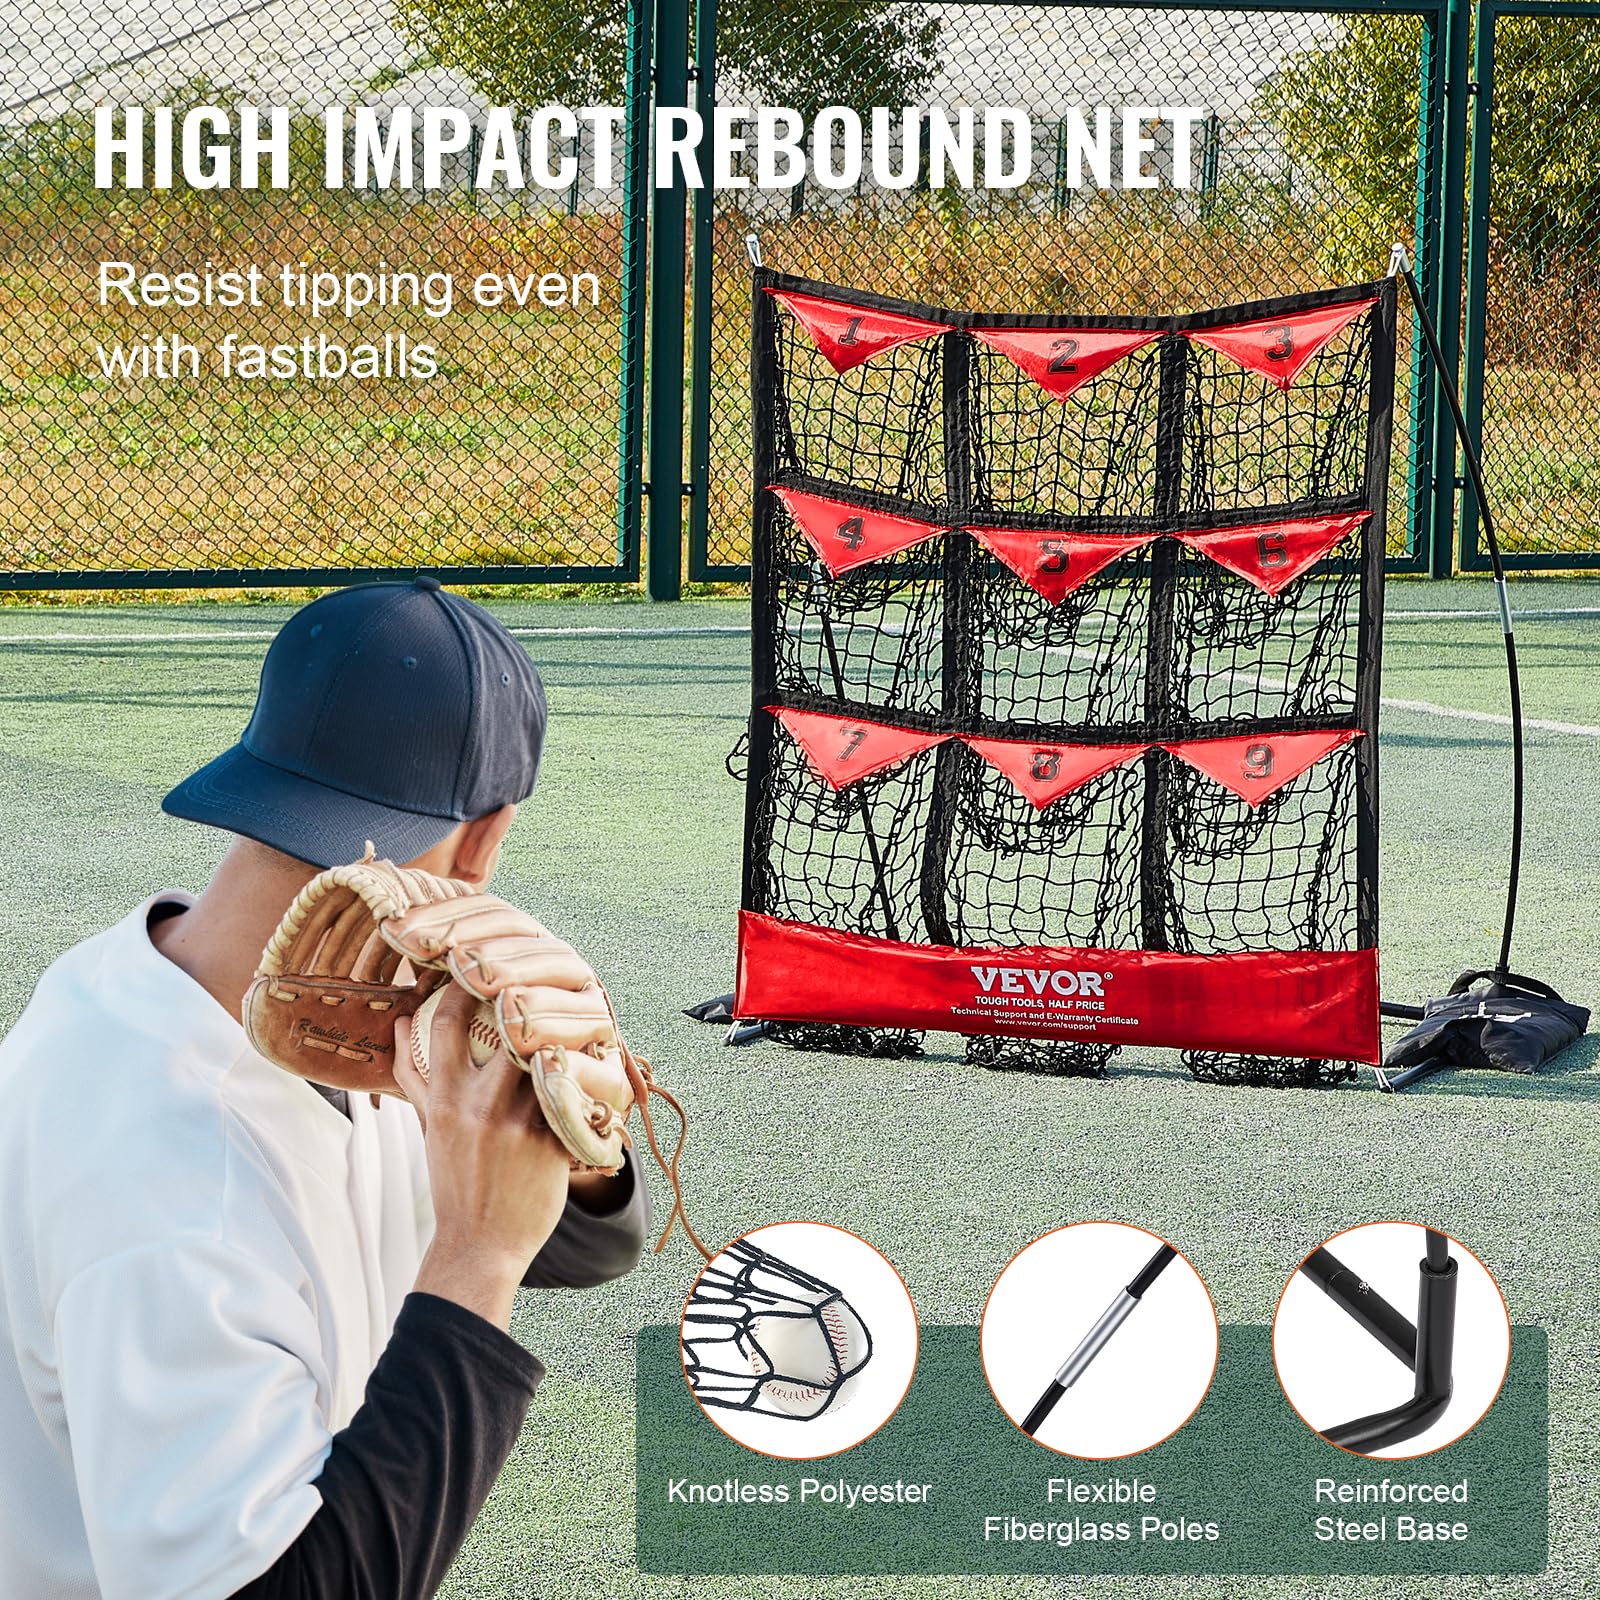 VEVOR 9 Hole Baseball Pitching Net,Softball Baseball Training Equipment for Hitting Pitching Practice, Portable Quick Assembly Trainer Aid with Carry Bag, Strike Zone, Ground Stakes, for Youth Adults